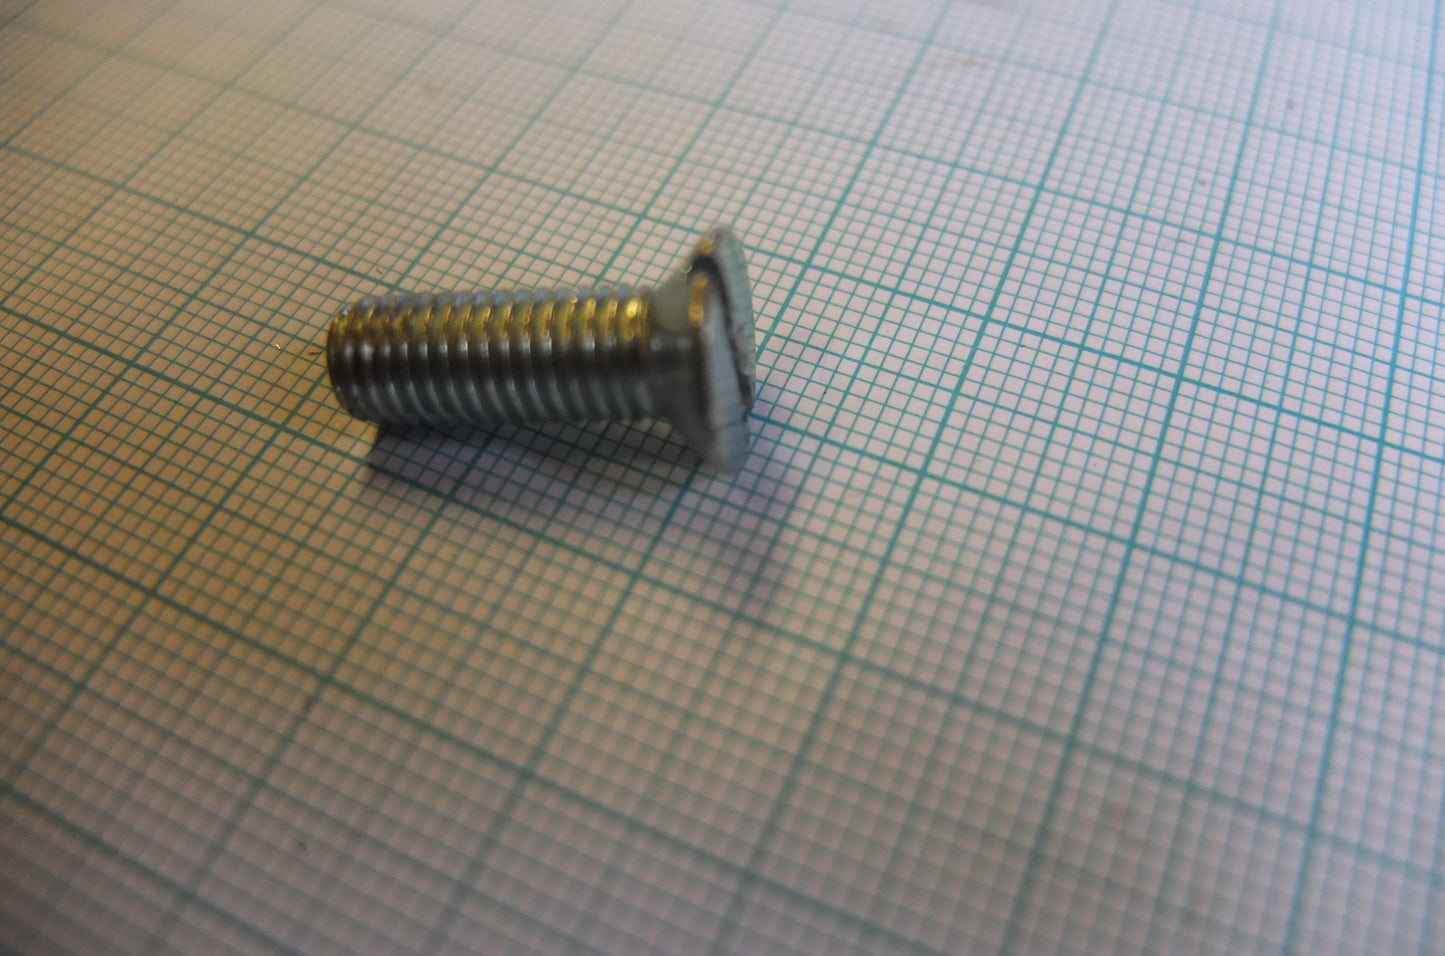 P3/038 Battery Carrier Fixing Screw